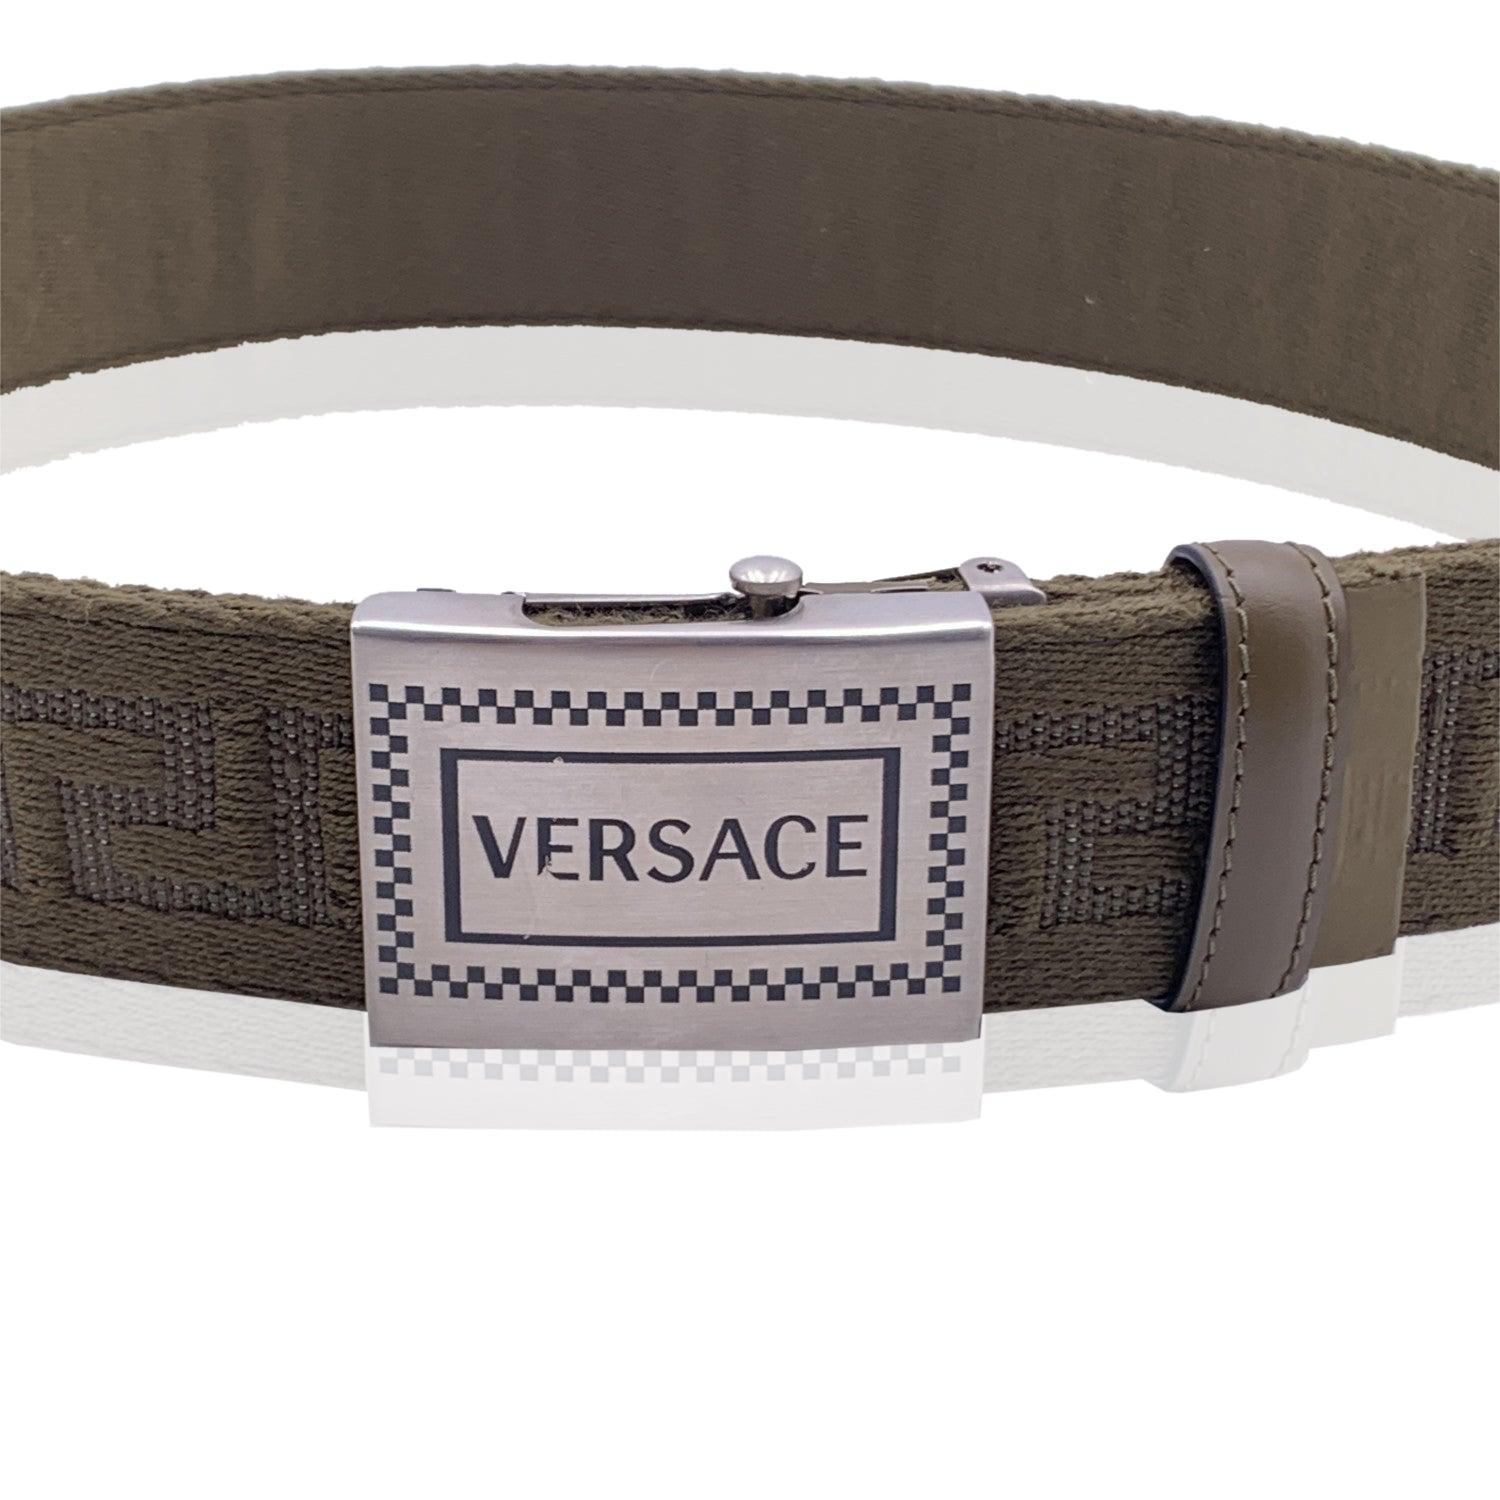 Military green unisex belt from Versace. Made from miltary green fabric, the belt features a Greek pattern, genuine leather trims and a silver metal signature logo buckle. Width: 1.5 inches - 4 cm. Size 80/32. Total length of the strap: 34.5 inches